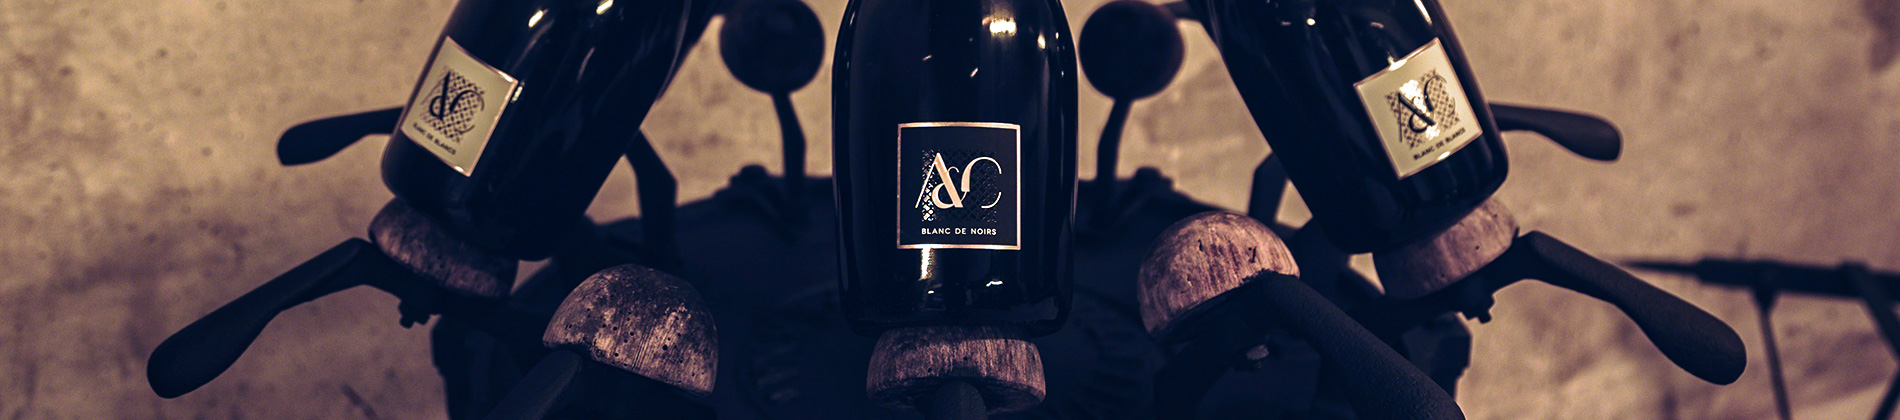 Champagne A&C TOULLEC